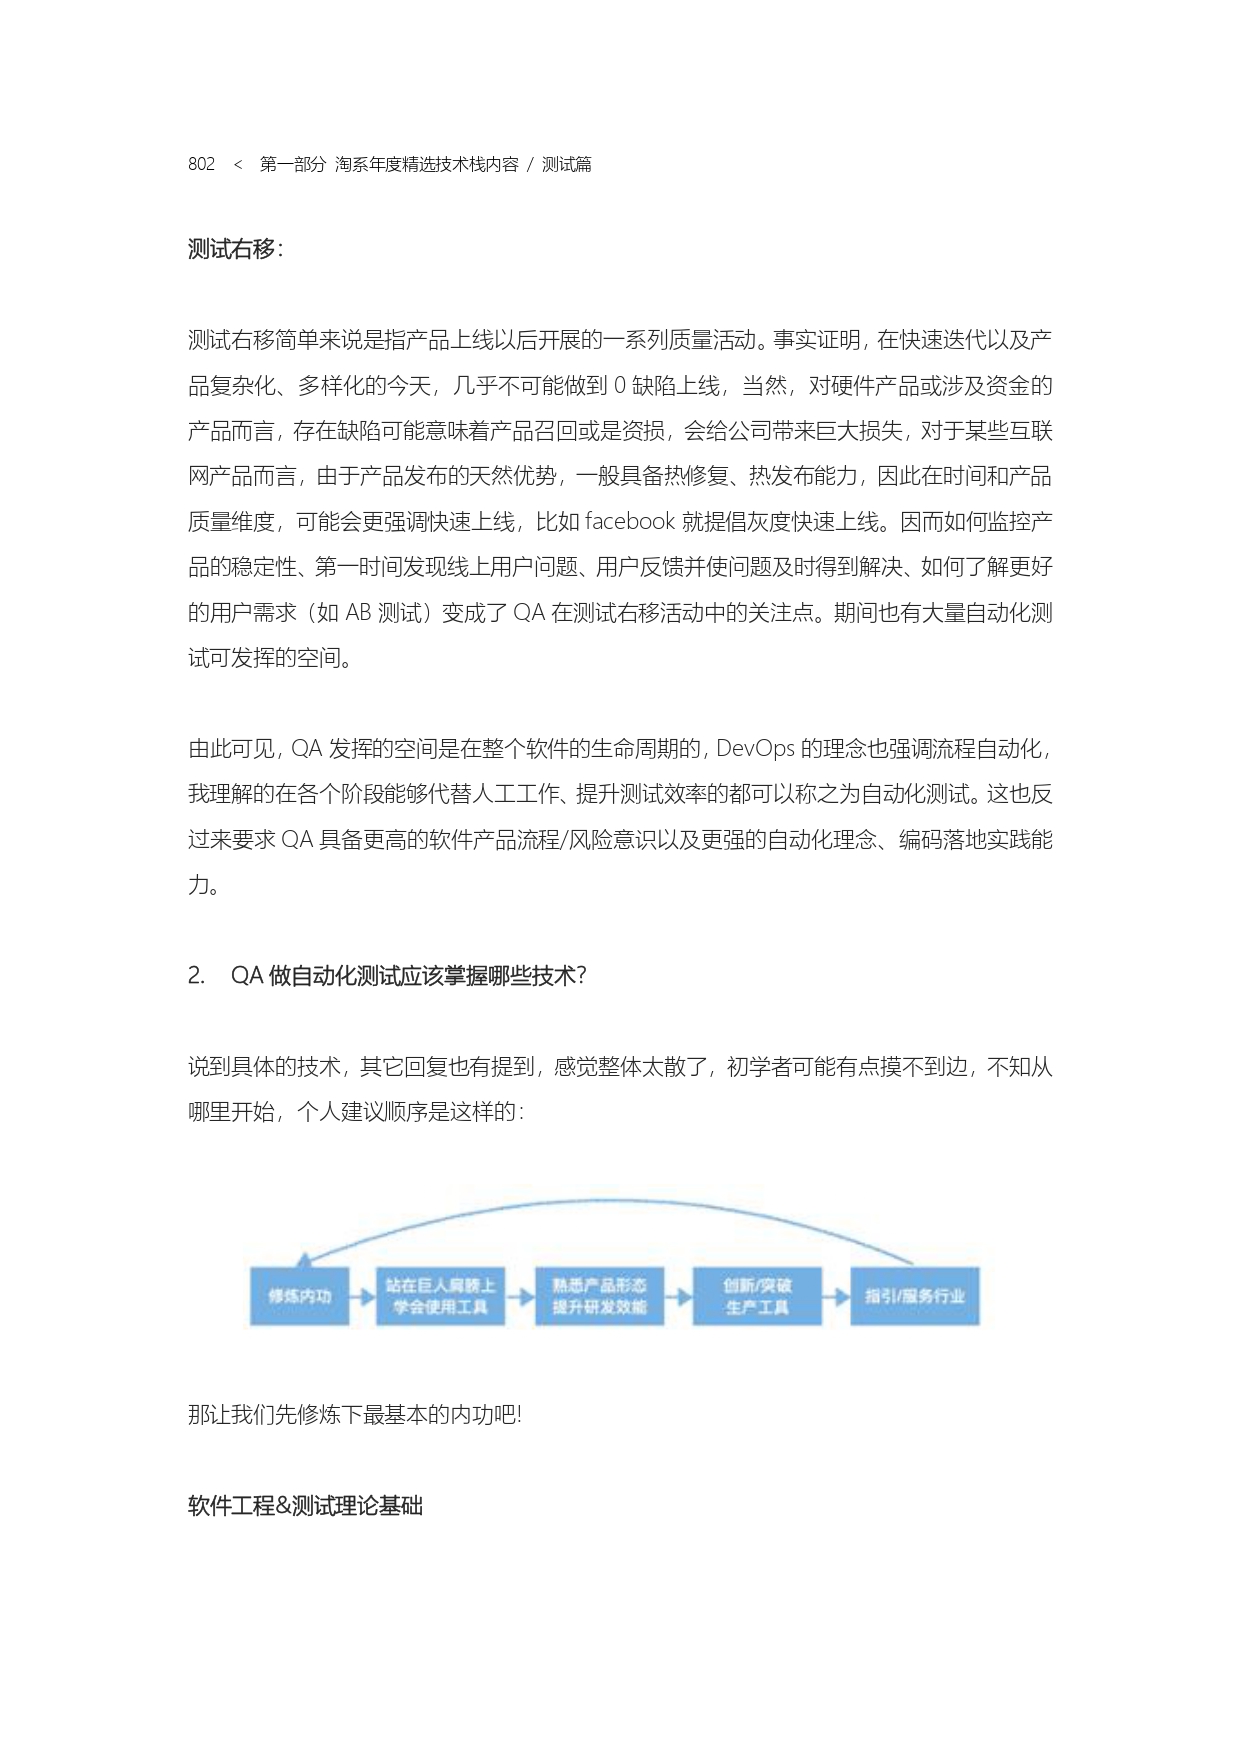 The Complete Works of Tao Technology 2020-571-1189-1-300_page-0232.jpg